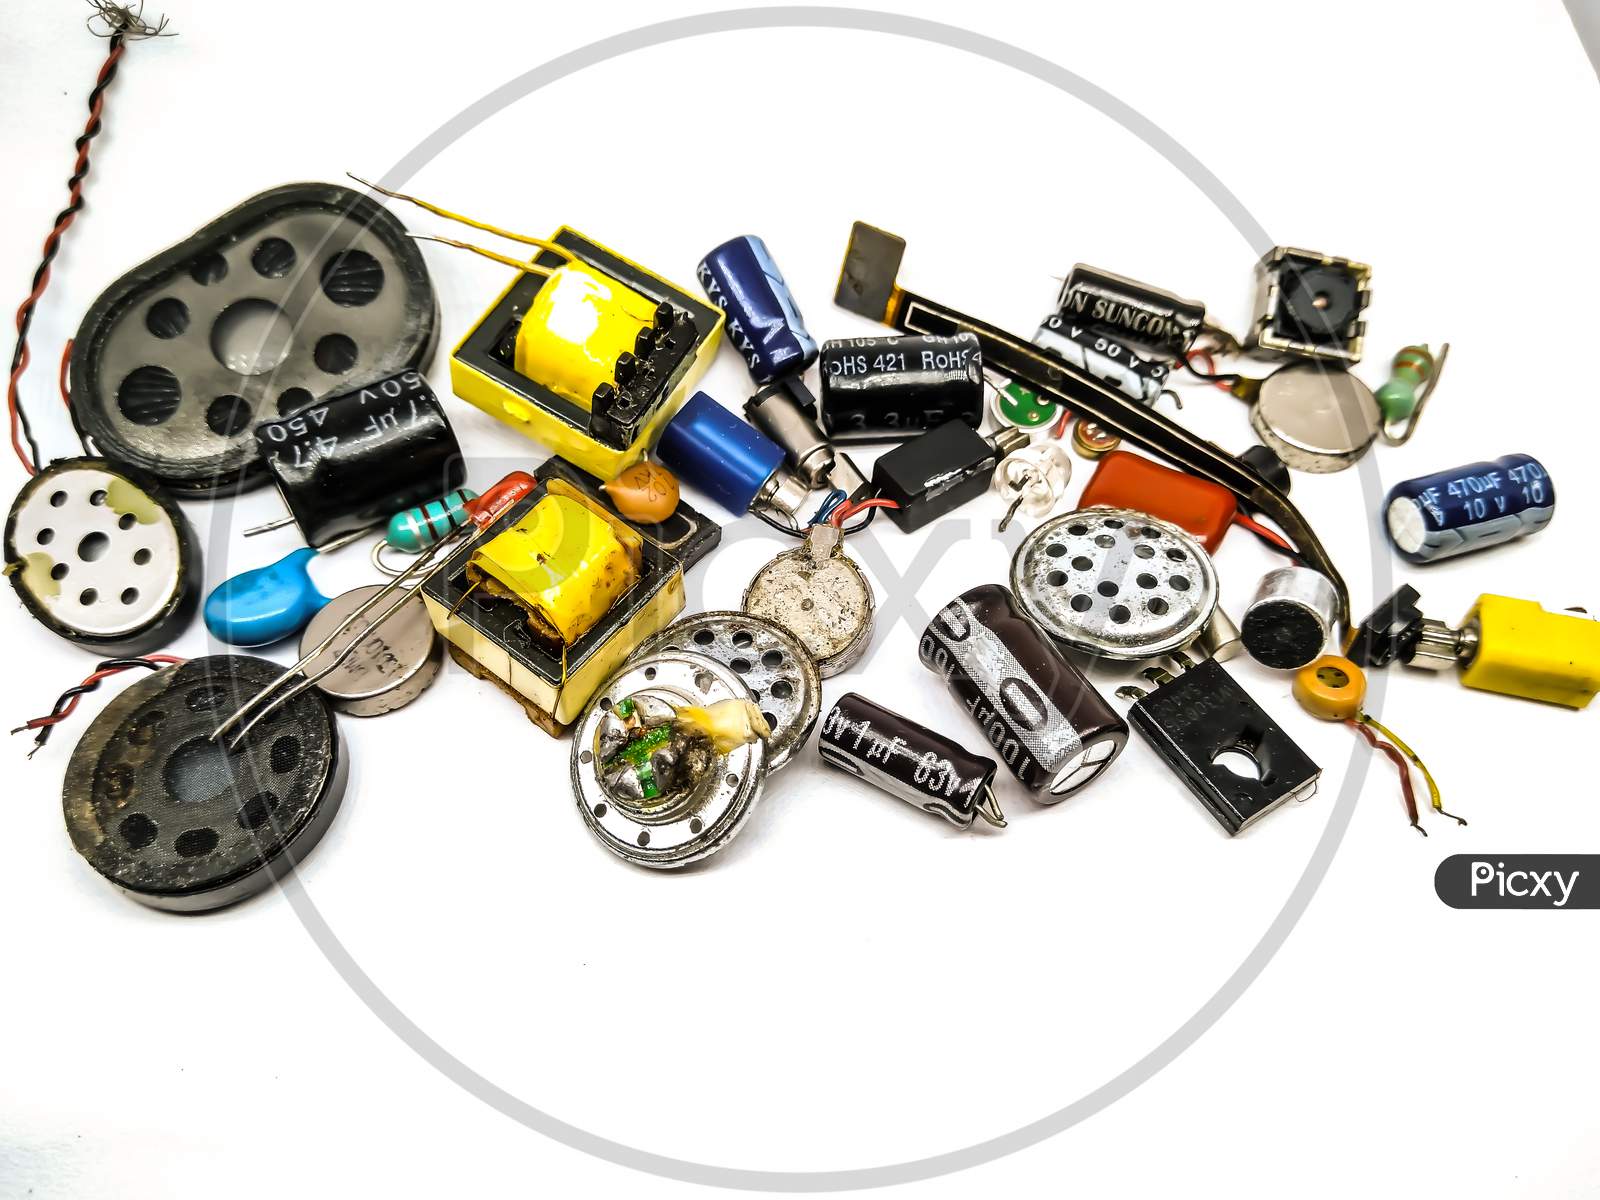 Micro Electronic parts Or Components Closeup Over an isolated White Background